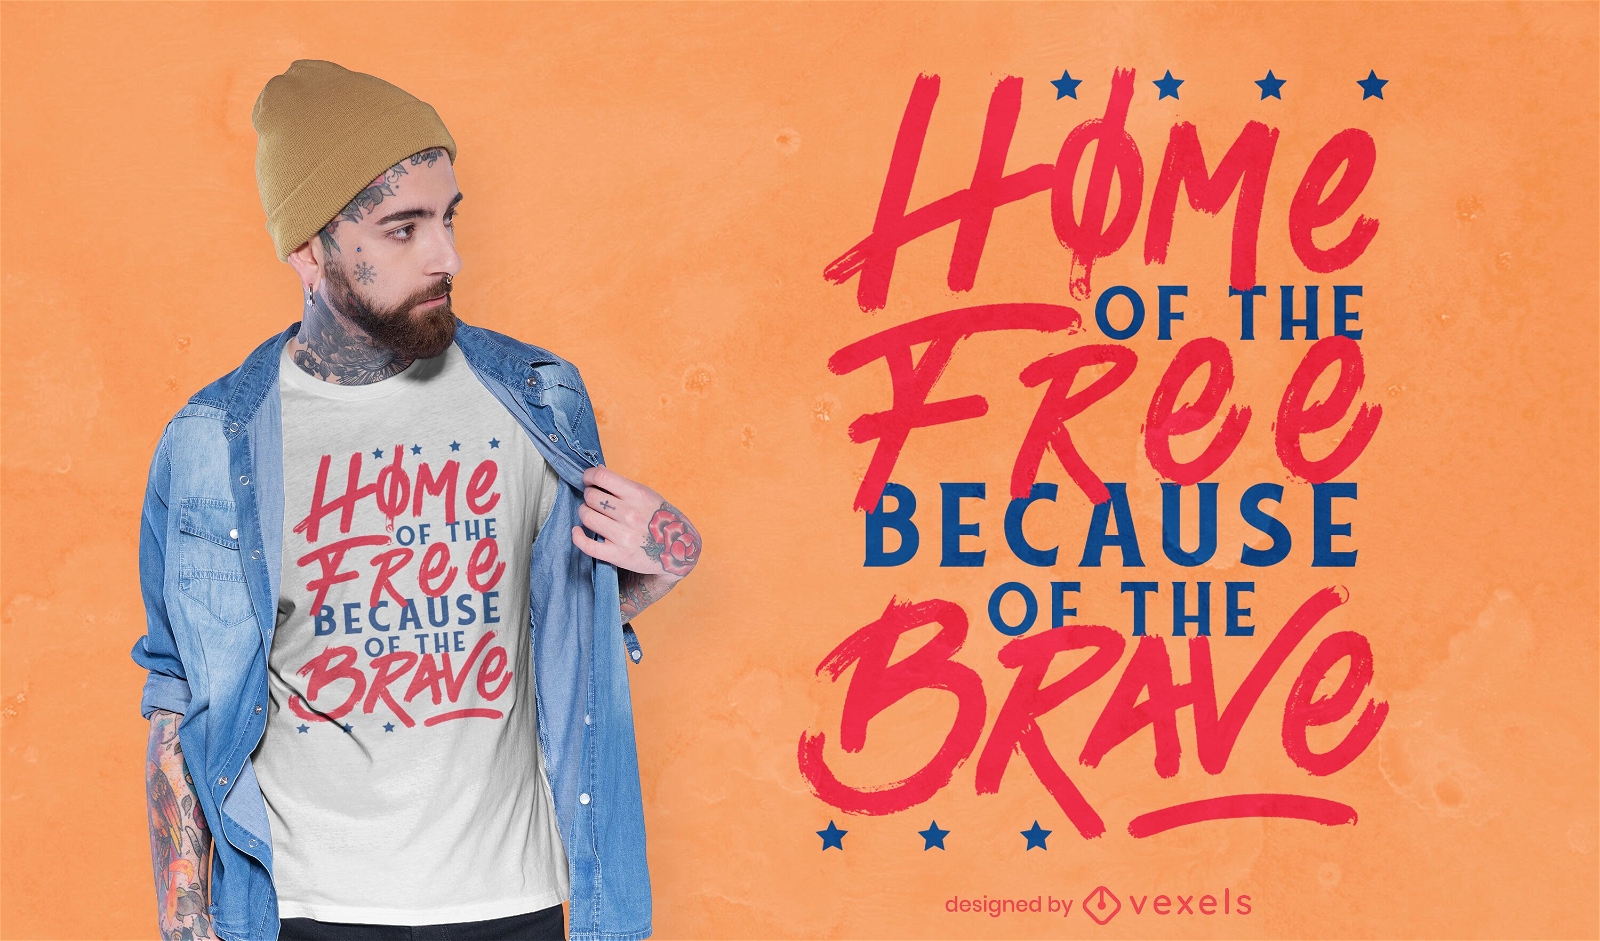 Free and brave usa quote t-shirt design